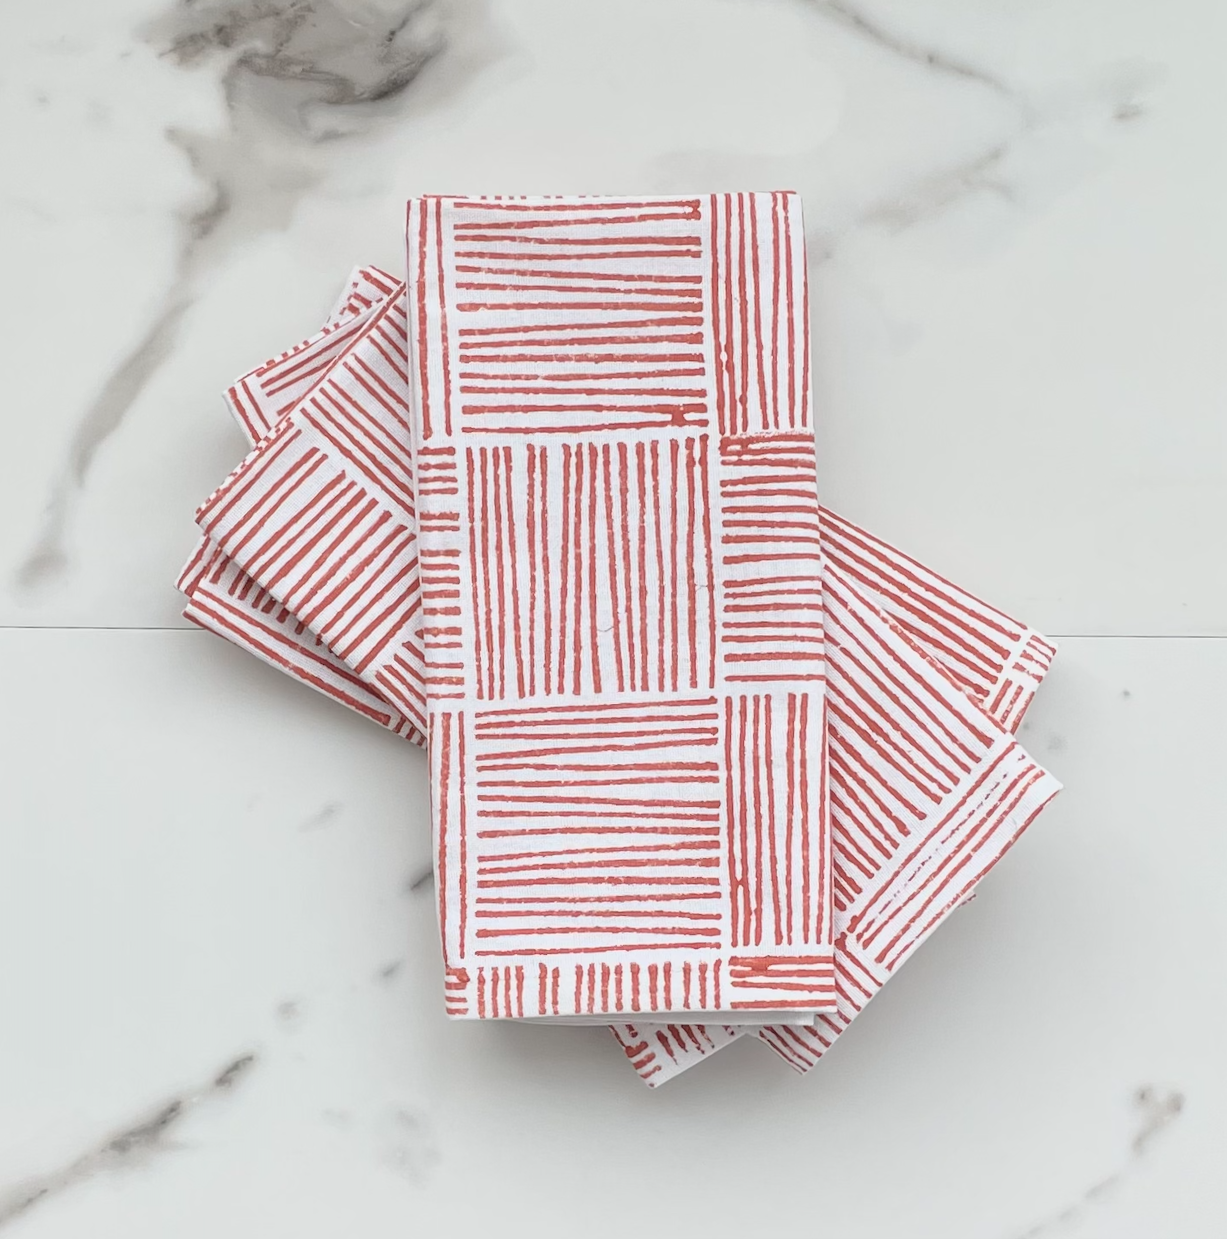 Dinner Napkins (set of 4) - Striped, Coral by Mended